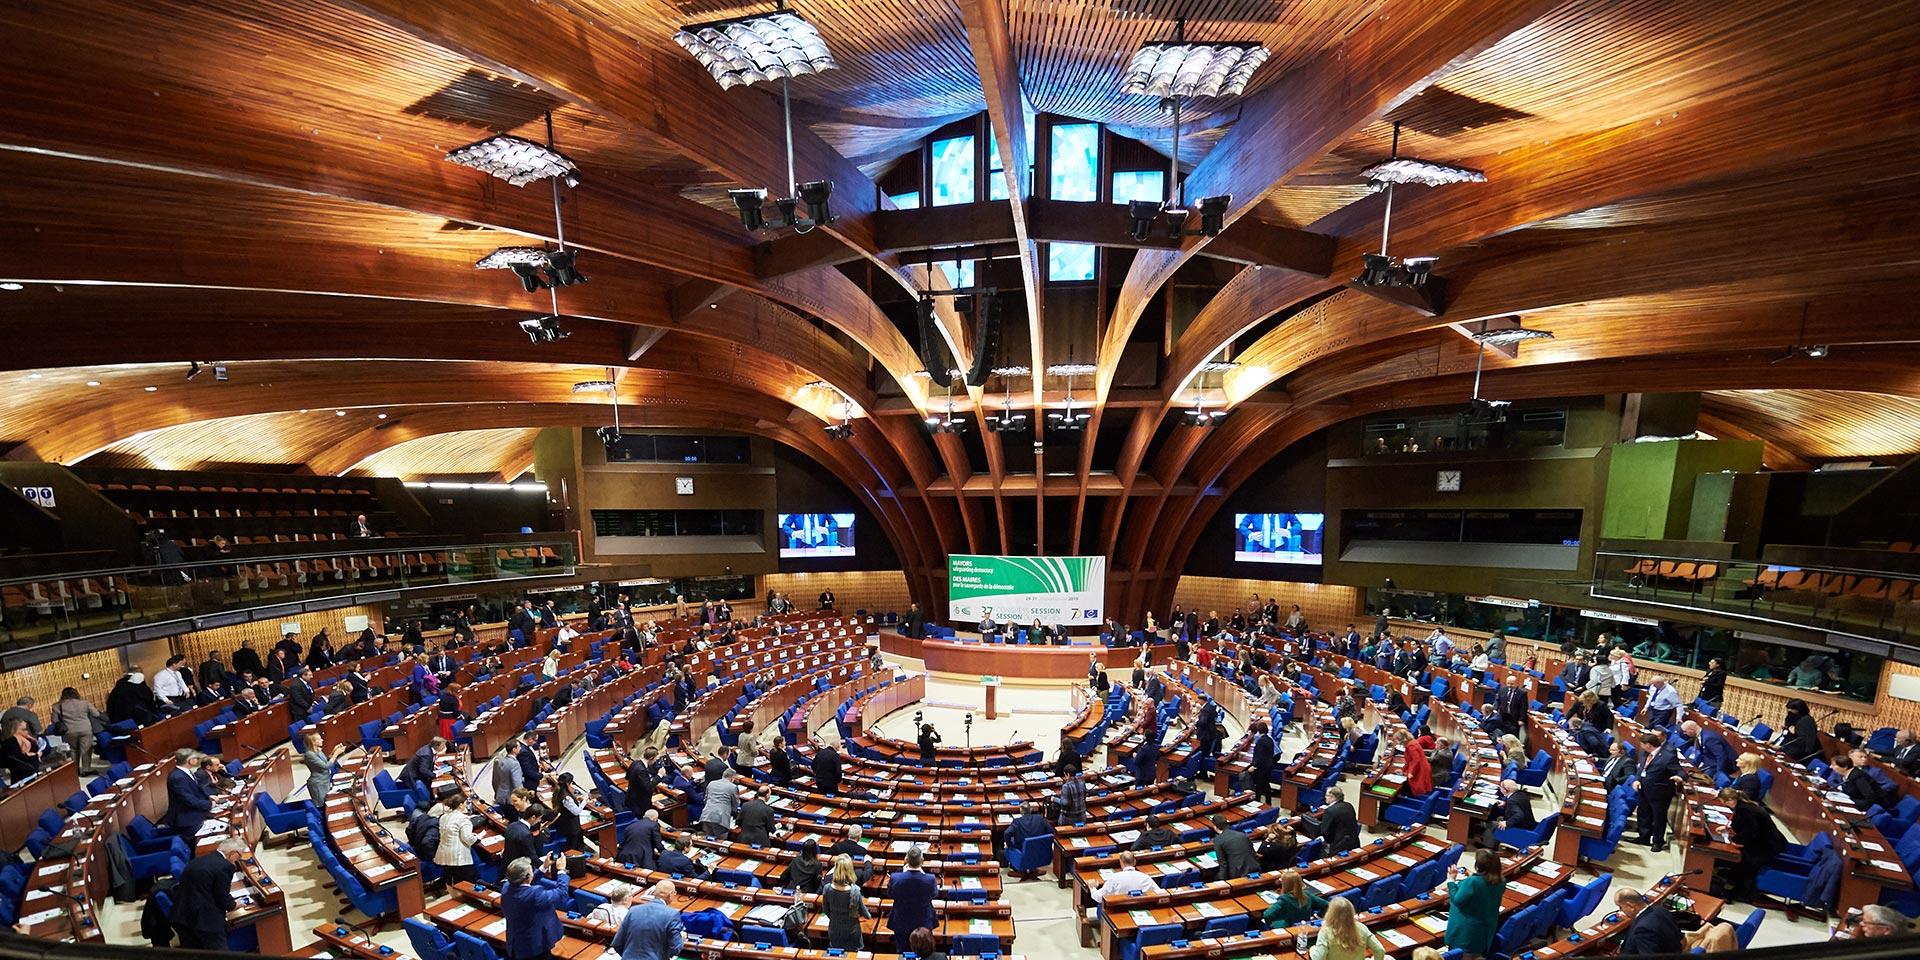 Inside the Palais de l'Europe in Strasbourg – home to the Congress of Local and Regional Authorities of the Council of Europe.